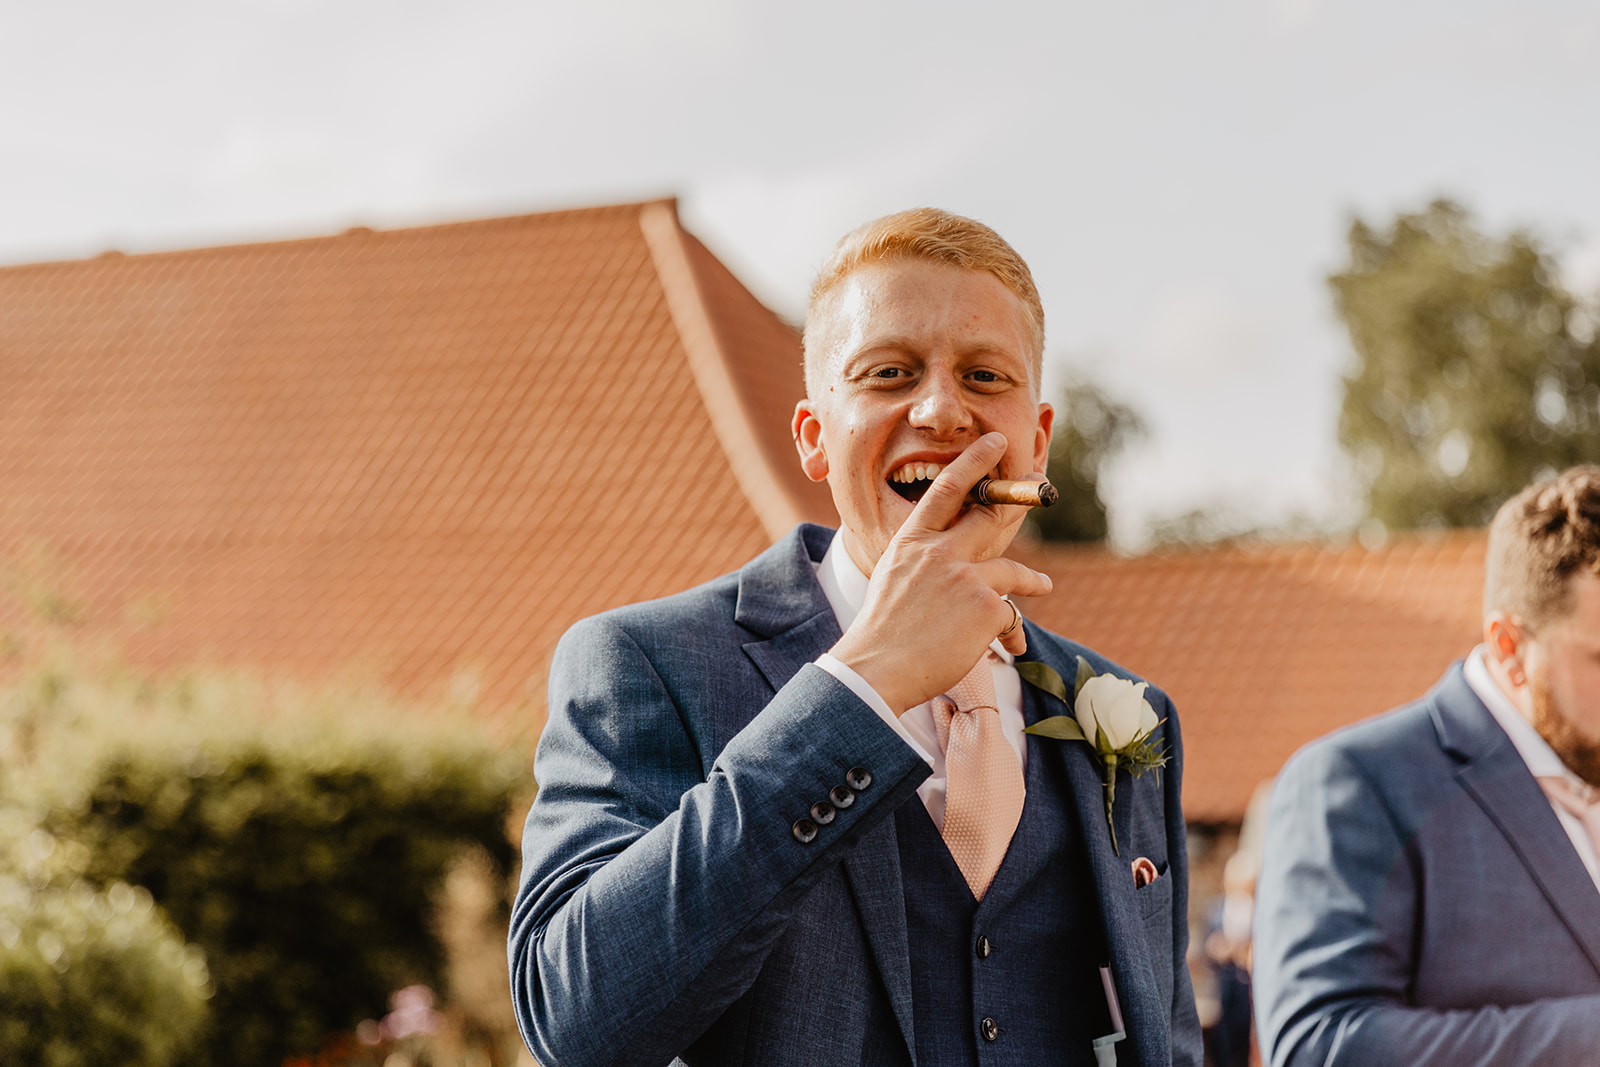 Groom at a Field Place Manor House Wedding in Worthing, Sussex. By Olive Joy Photography